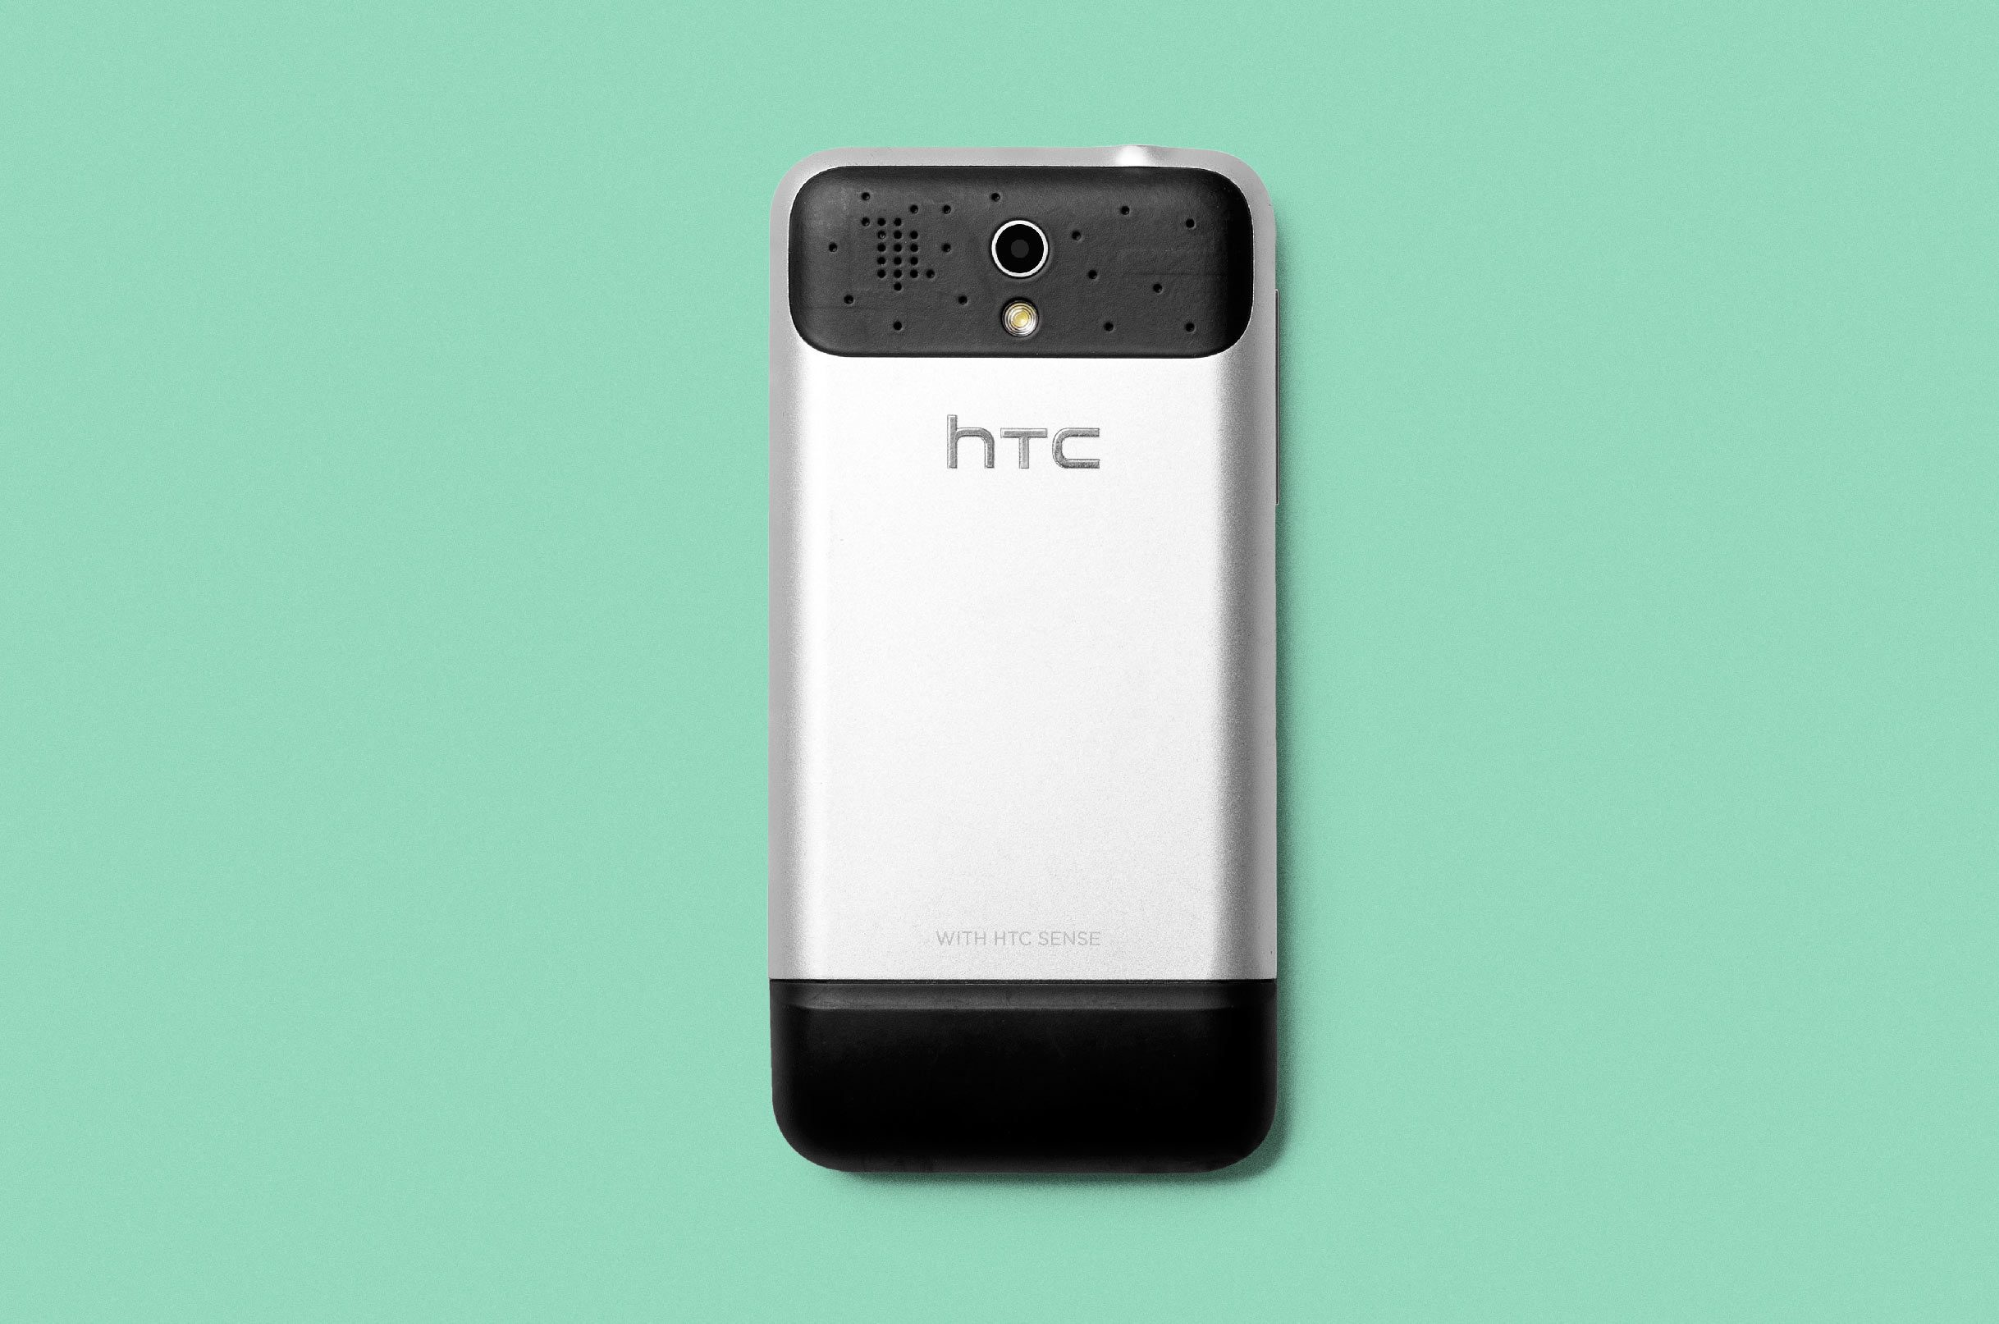 koffie Middellandse Zee Bully What Can We Learn From HTC - A Forgotten Design Pioneer - Blogs - Blogs